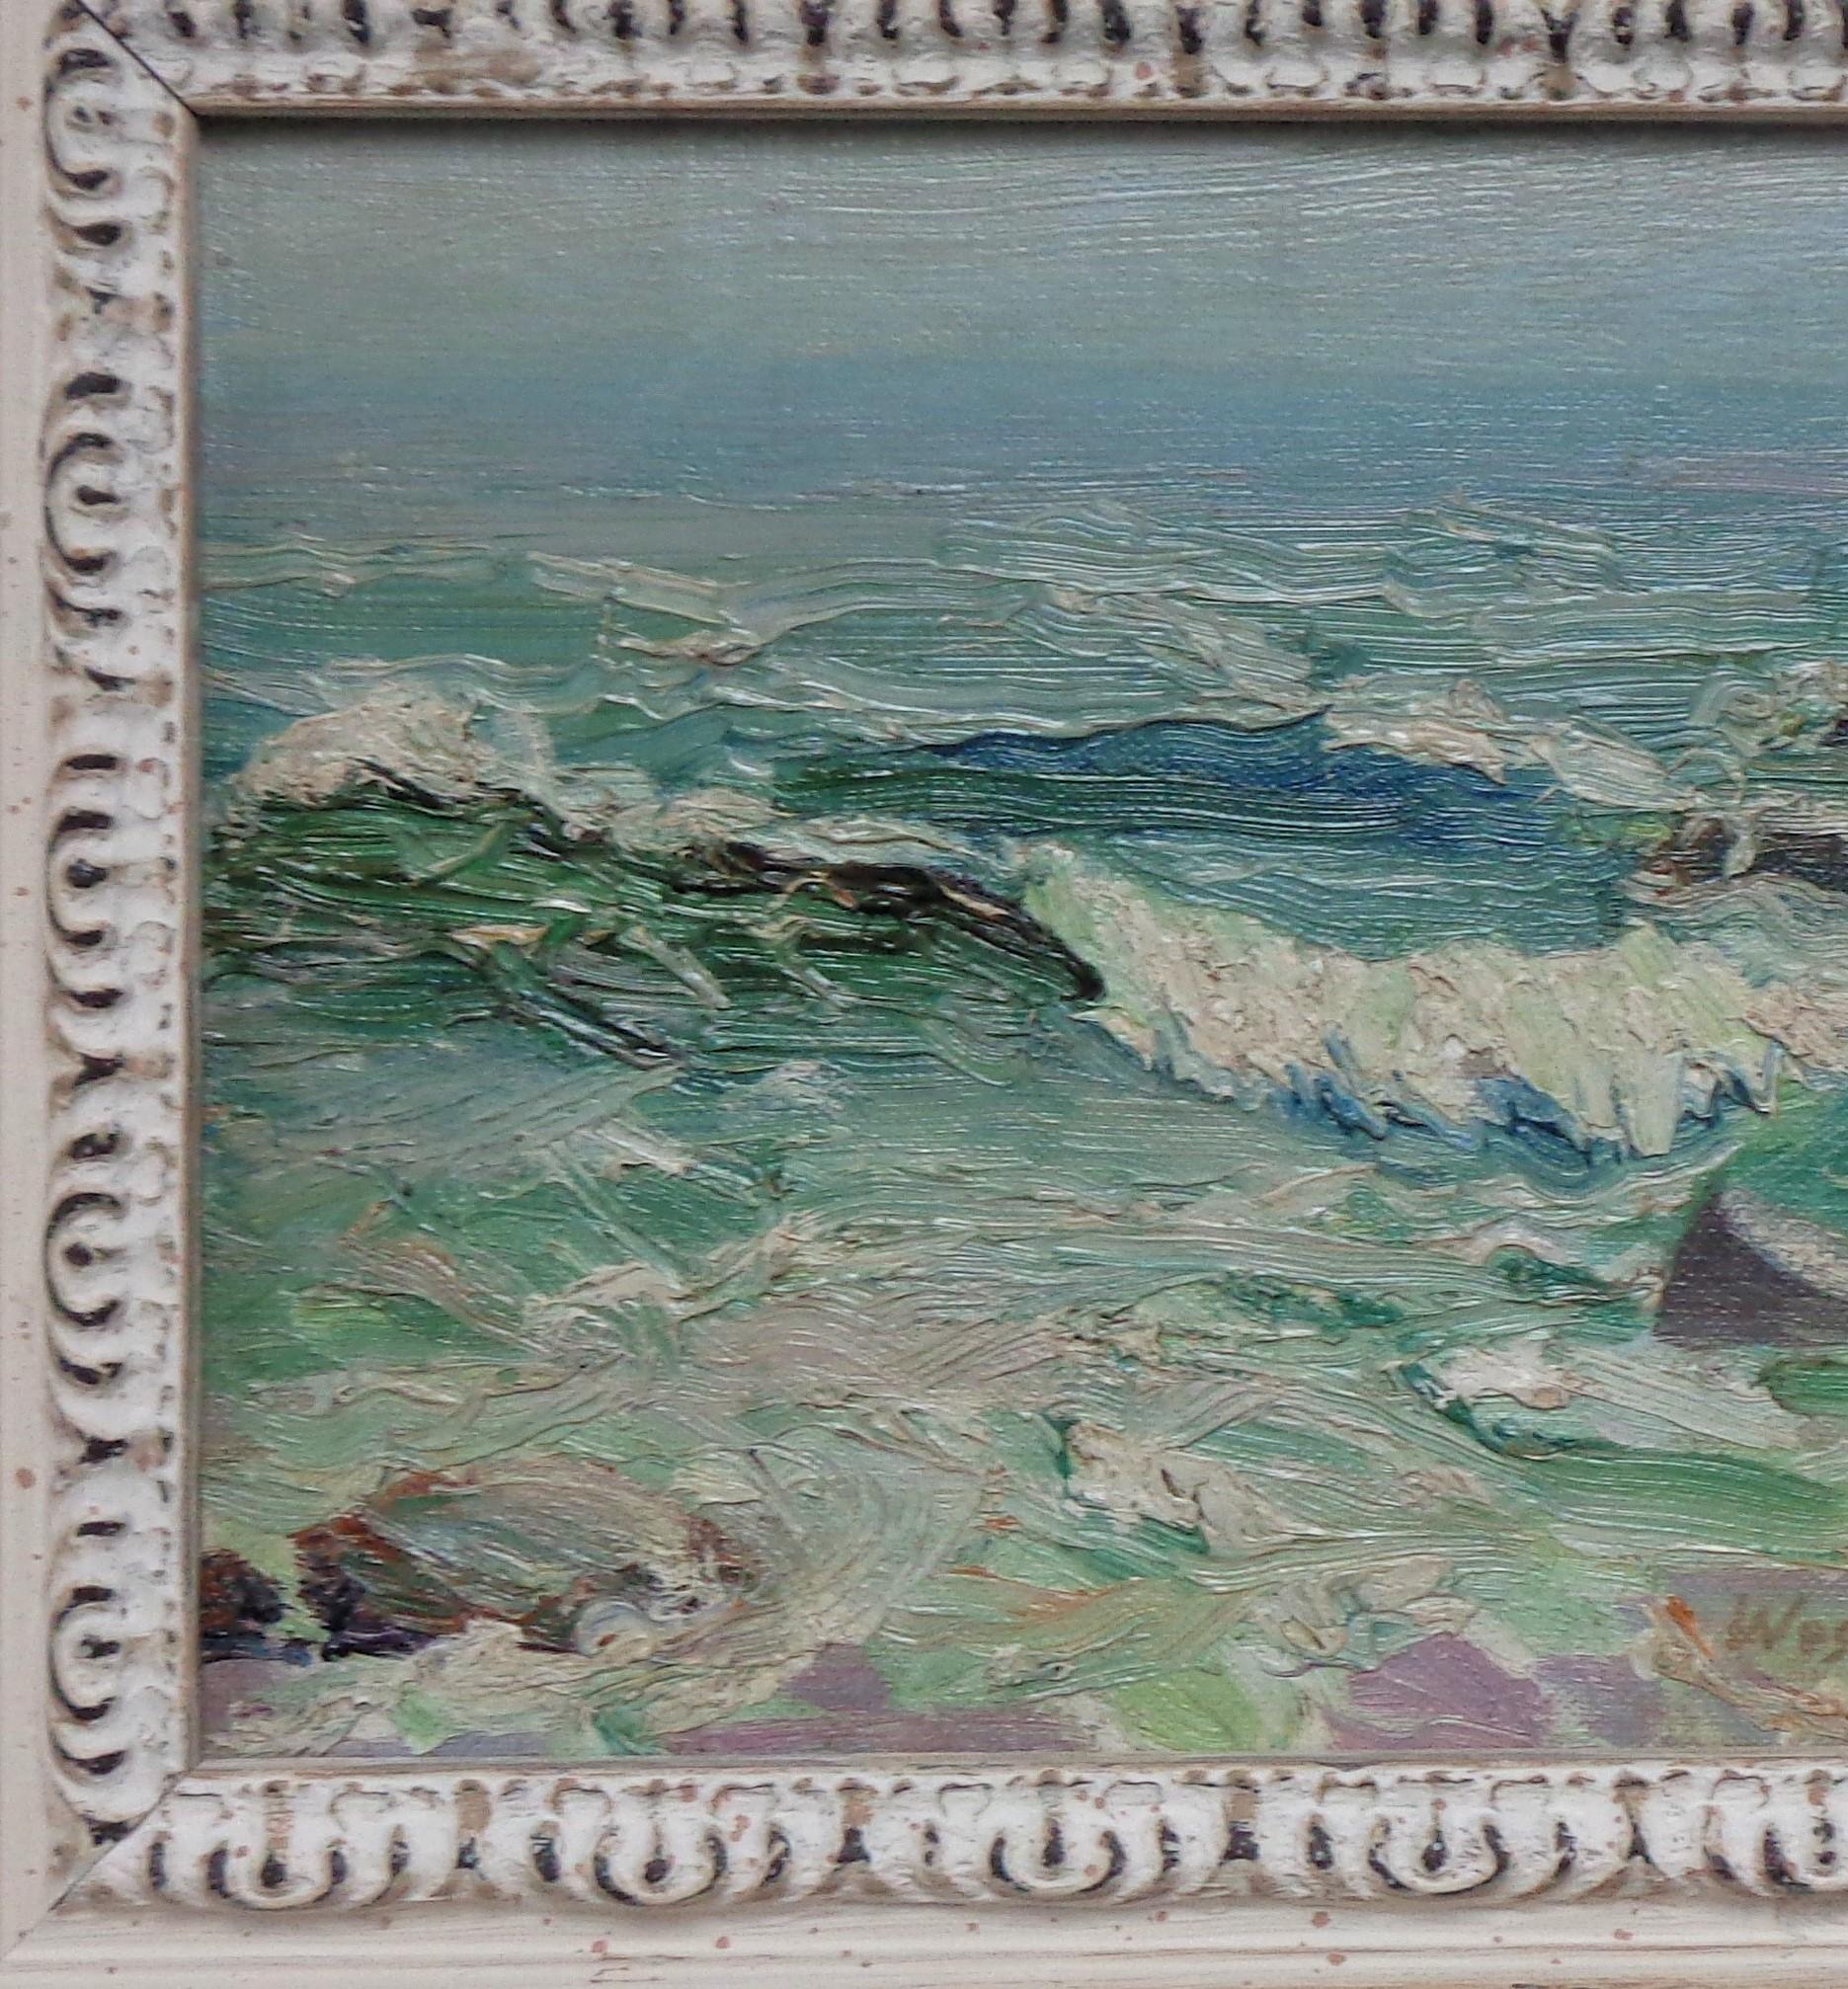 Rough Sea
oil on canvas board, image 9 x 12 signed LR
Constantin A. Westchiloff   1877 – 1945 was an impressionist painter born in Russia. He emigrated from Soviet Russia in 1922, lived in Italy (1923-1928), France (1929-1935), and immigrated to the